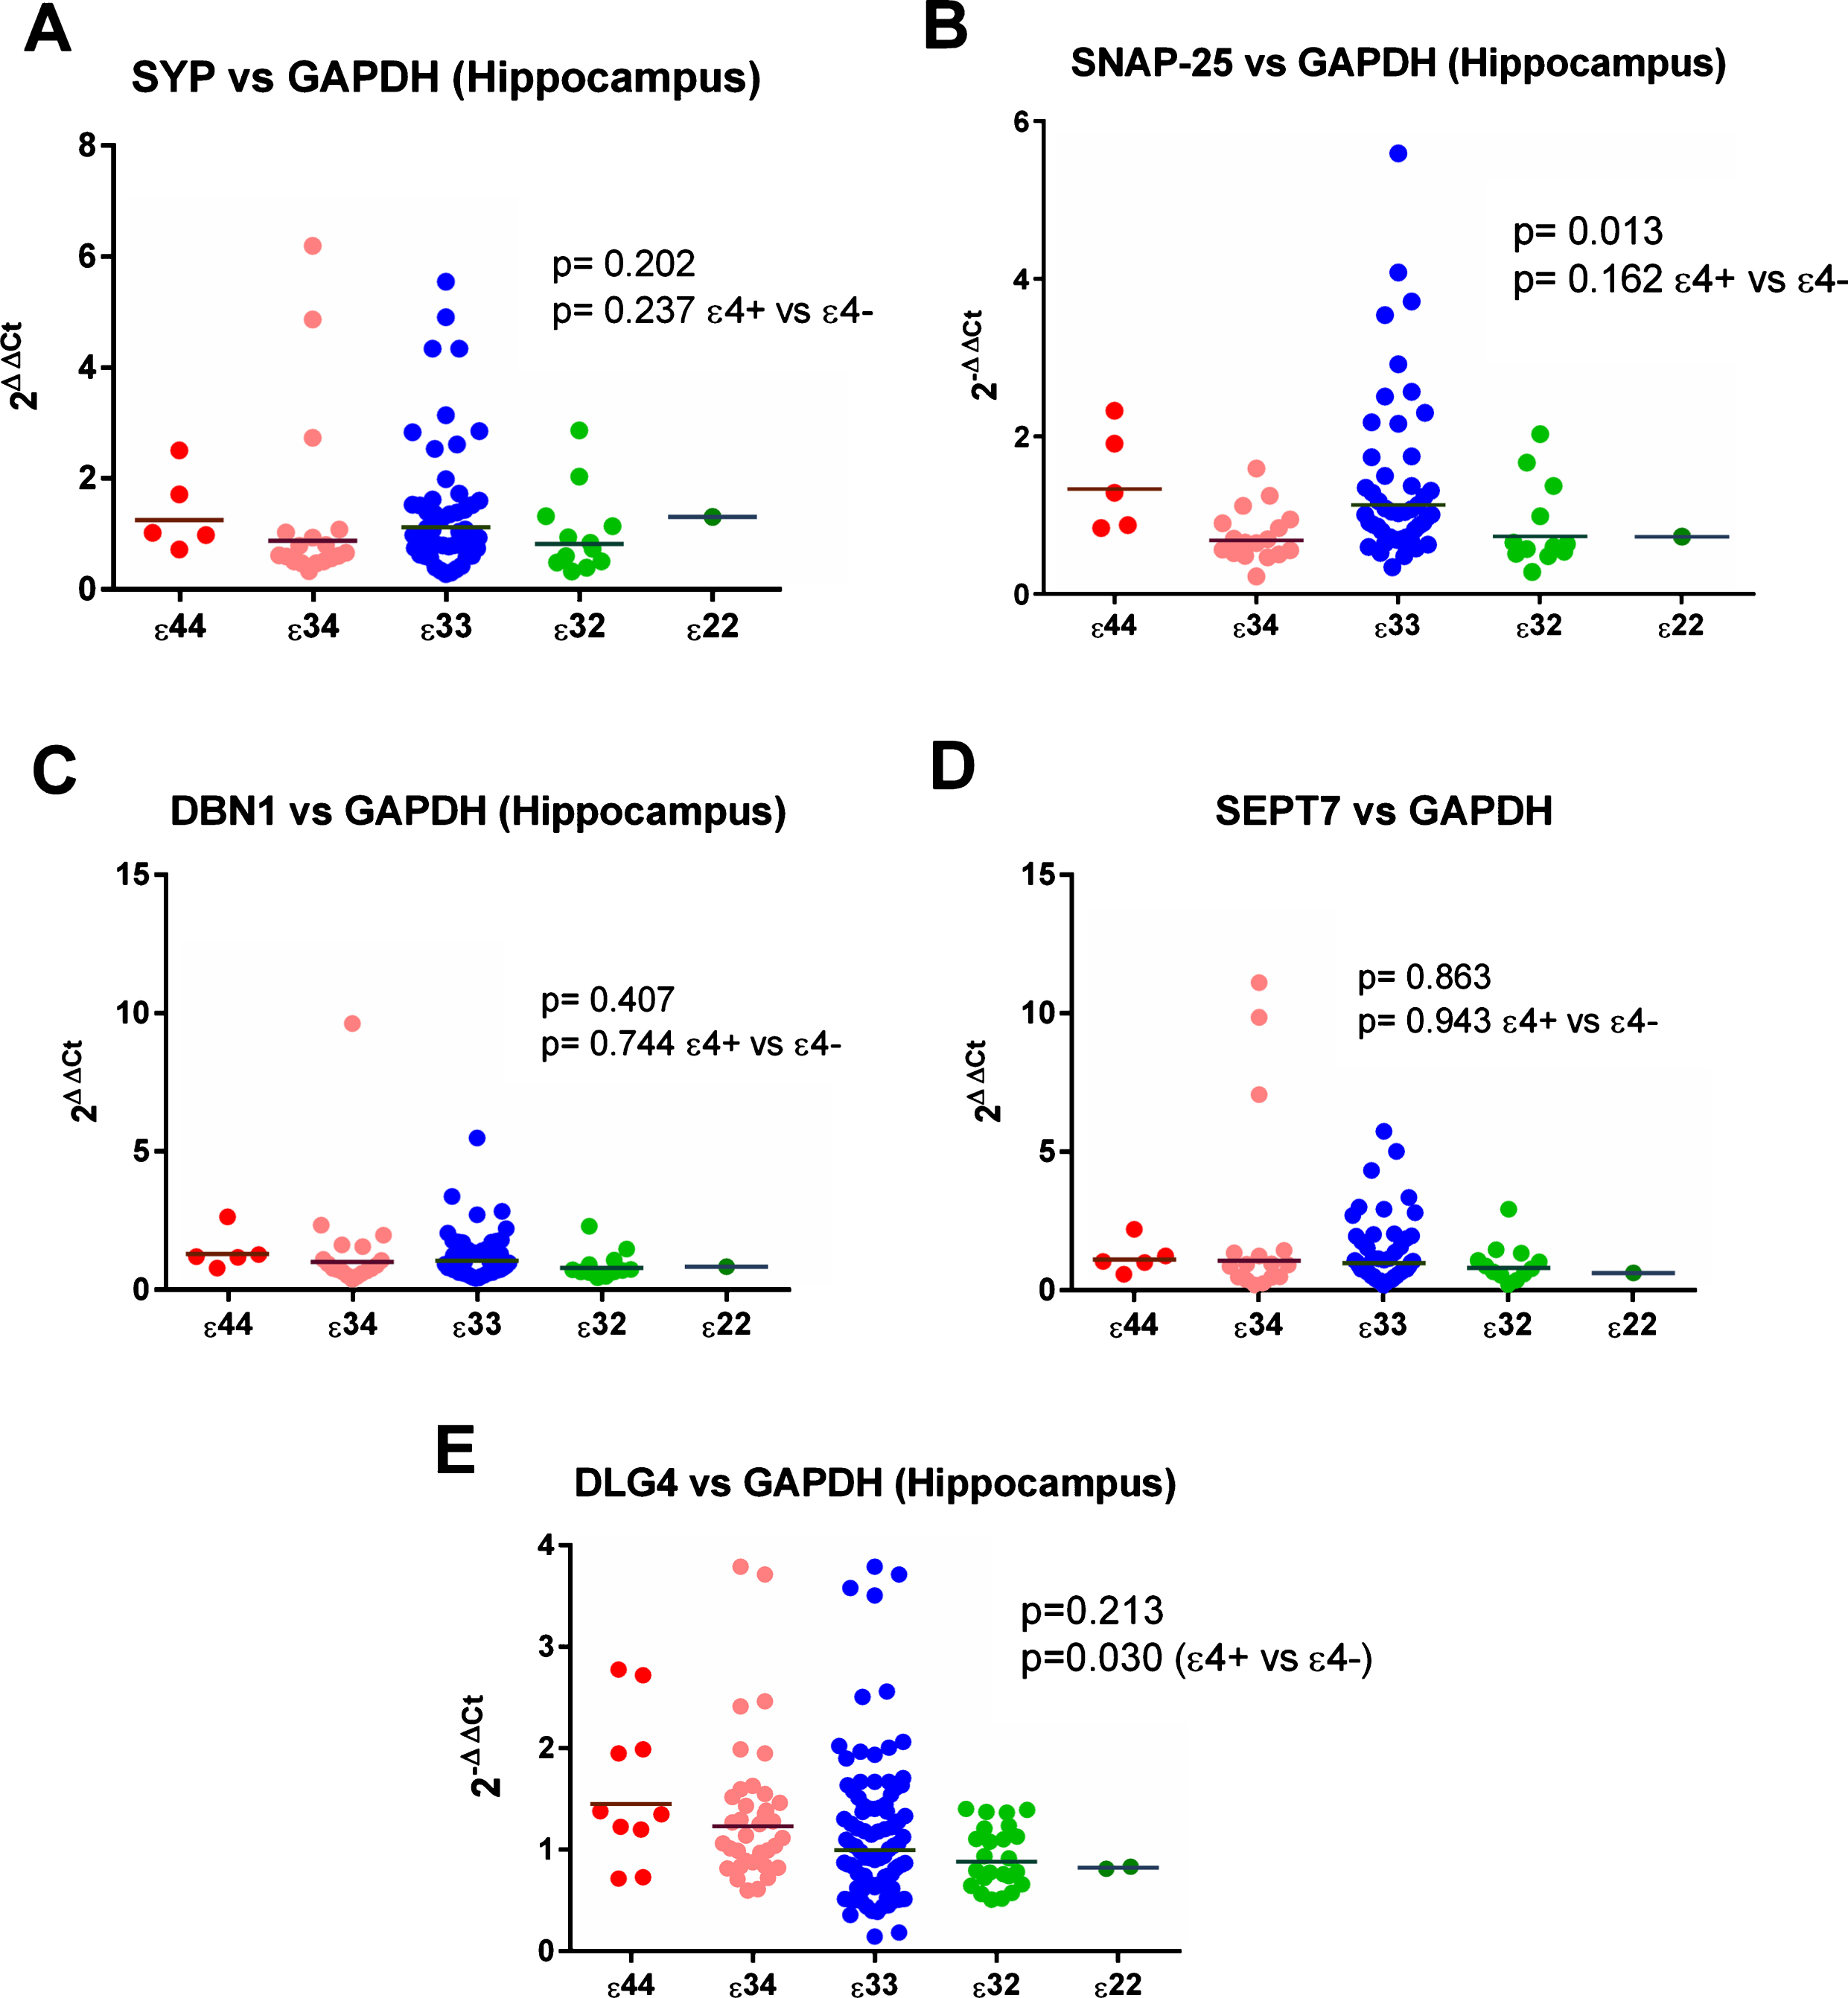 Results from the gene expression study in the hippocampus with GAPDH used as the reference gene. As shown in (E), expression of DLG4 (the gene for PSD-95) appeared to be increased in ɛ4 carriers.